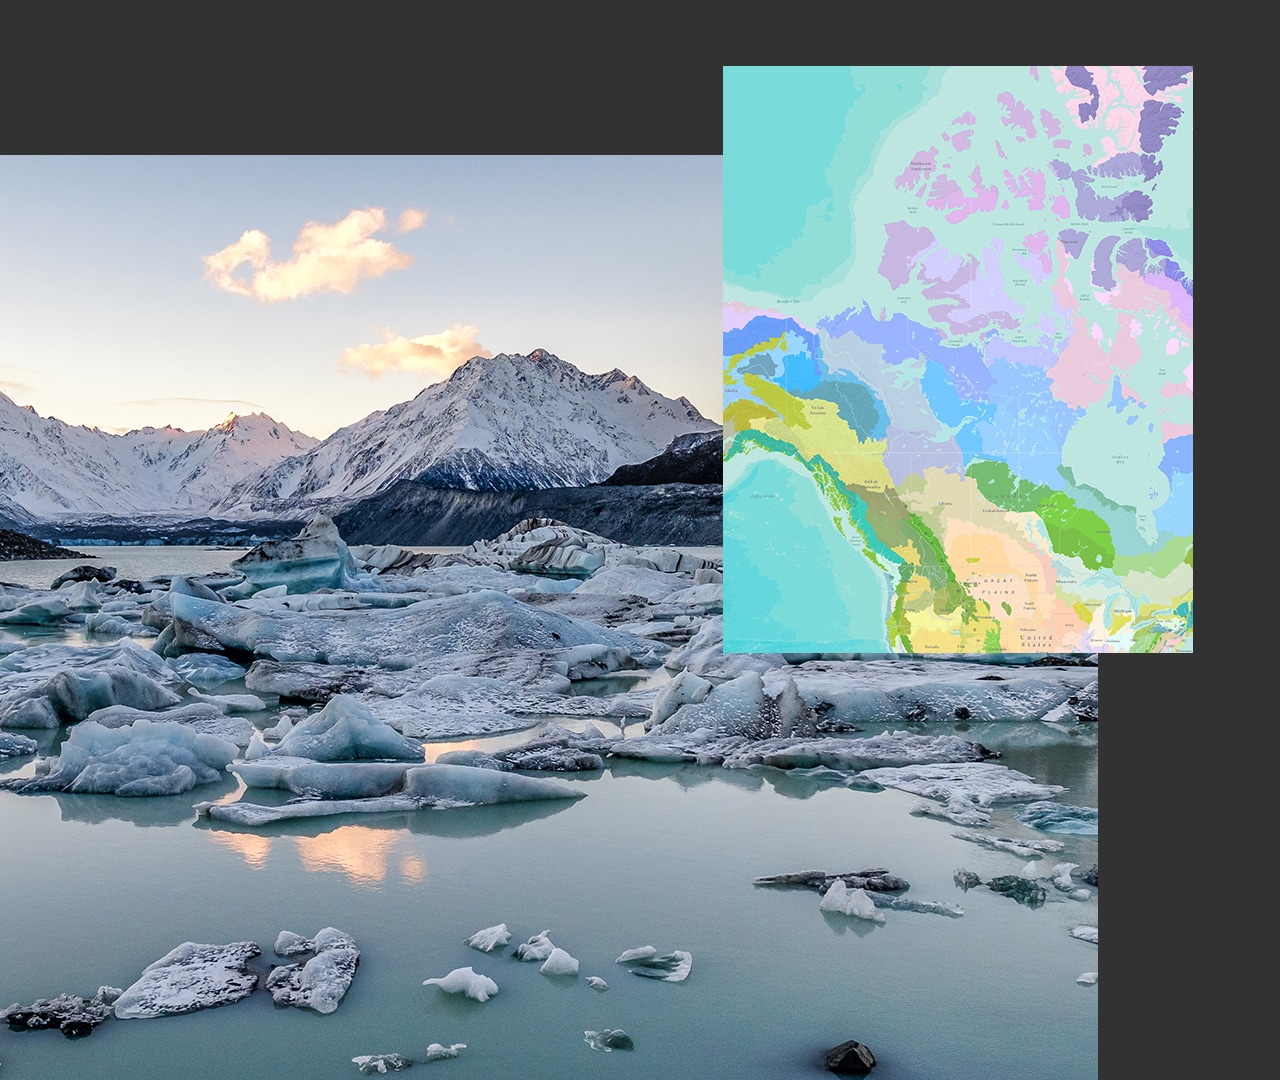 A large picture of snowcapped mountains and glaciers in the water with an inset multicolored map of land and water